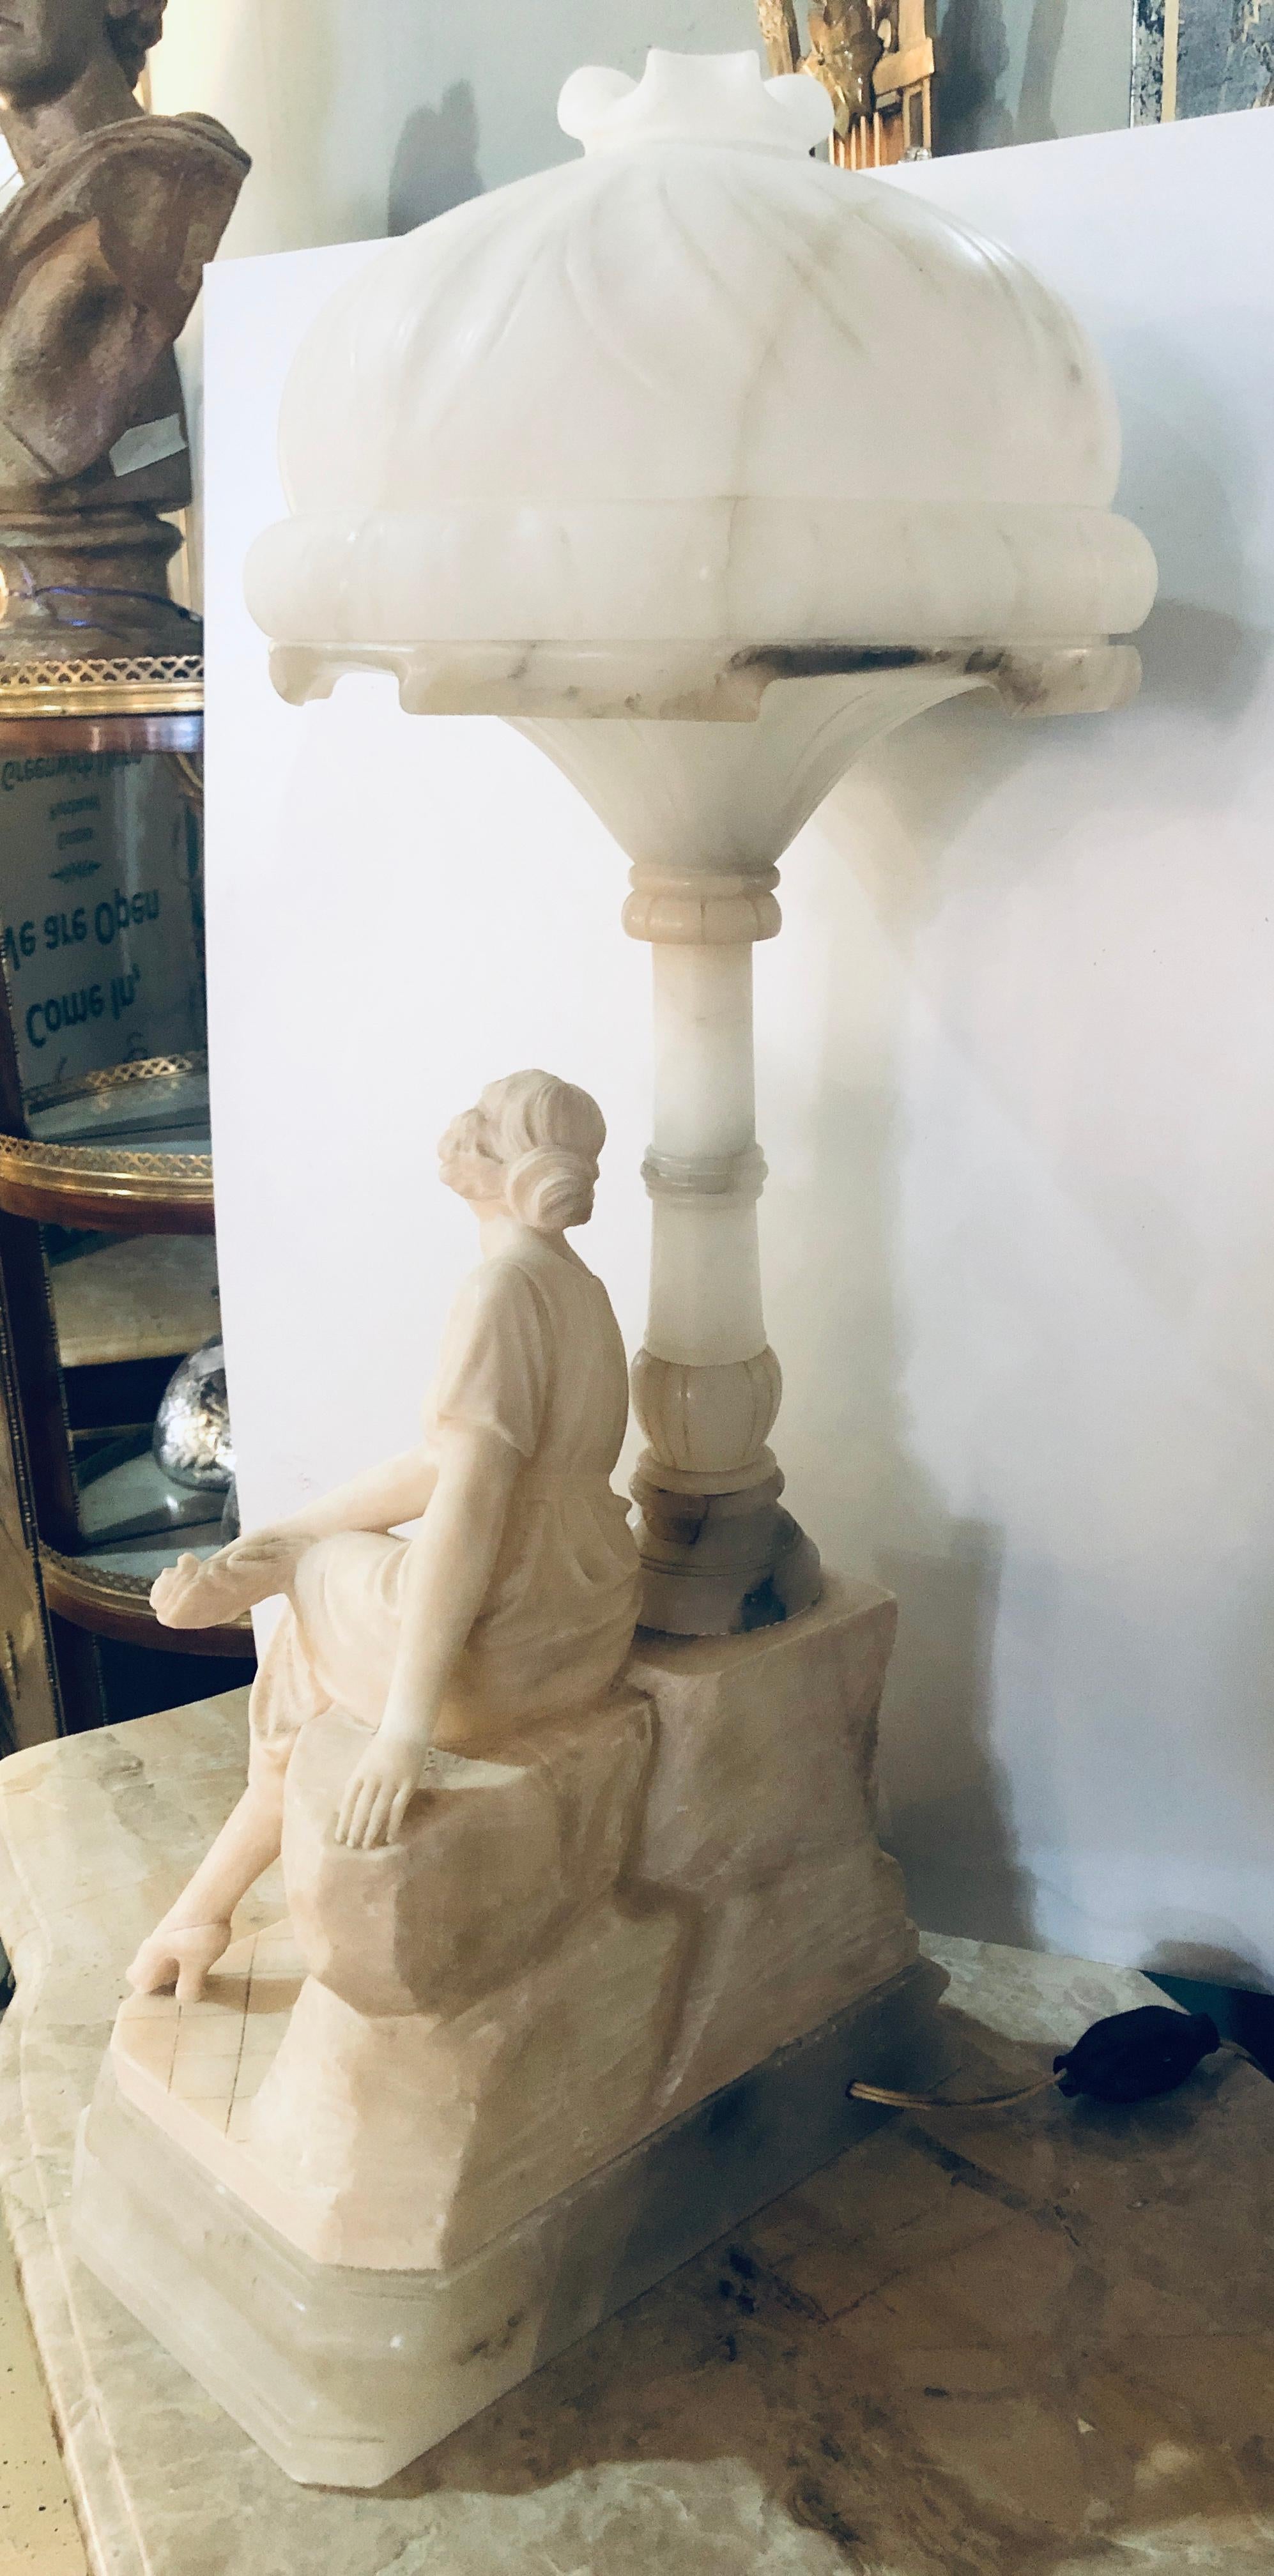 An Art Deco Alabaster Domed figural table lamp. A fine sculpture of a seated woman on a street lamp. After a touch night of dancing this cancan girl had to rest her feet on the way home. The interior or the globe taking one bulb.